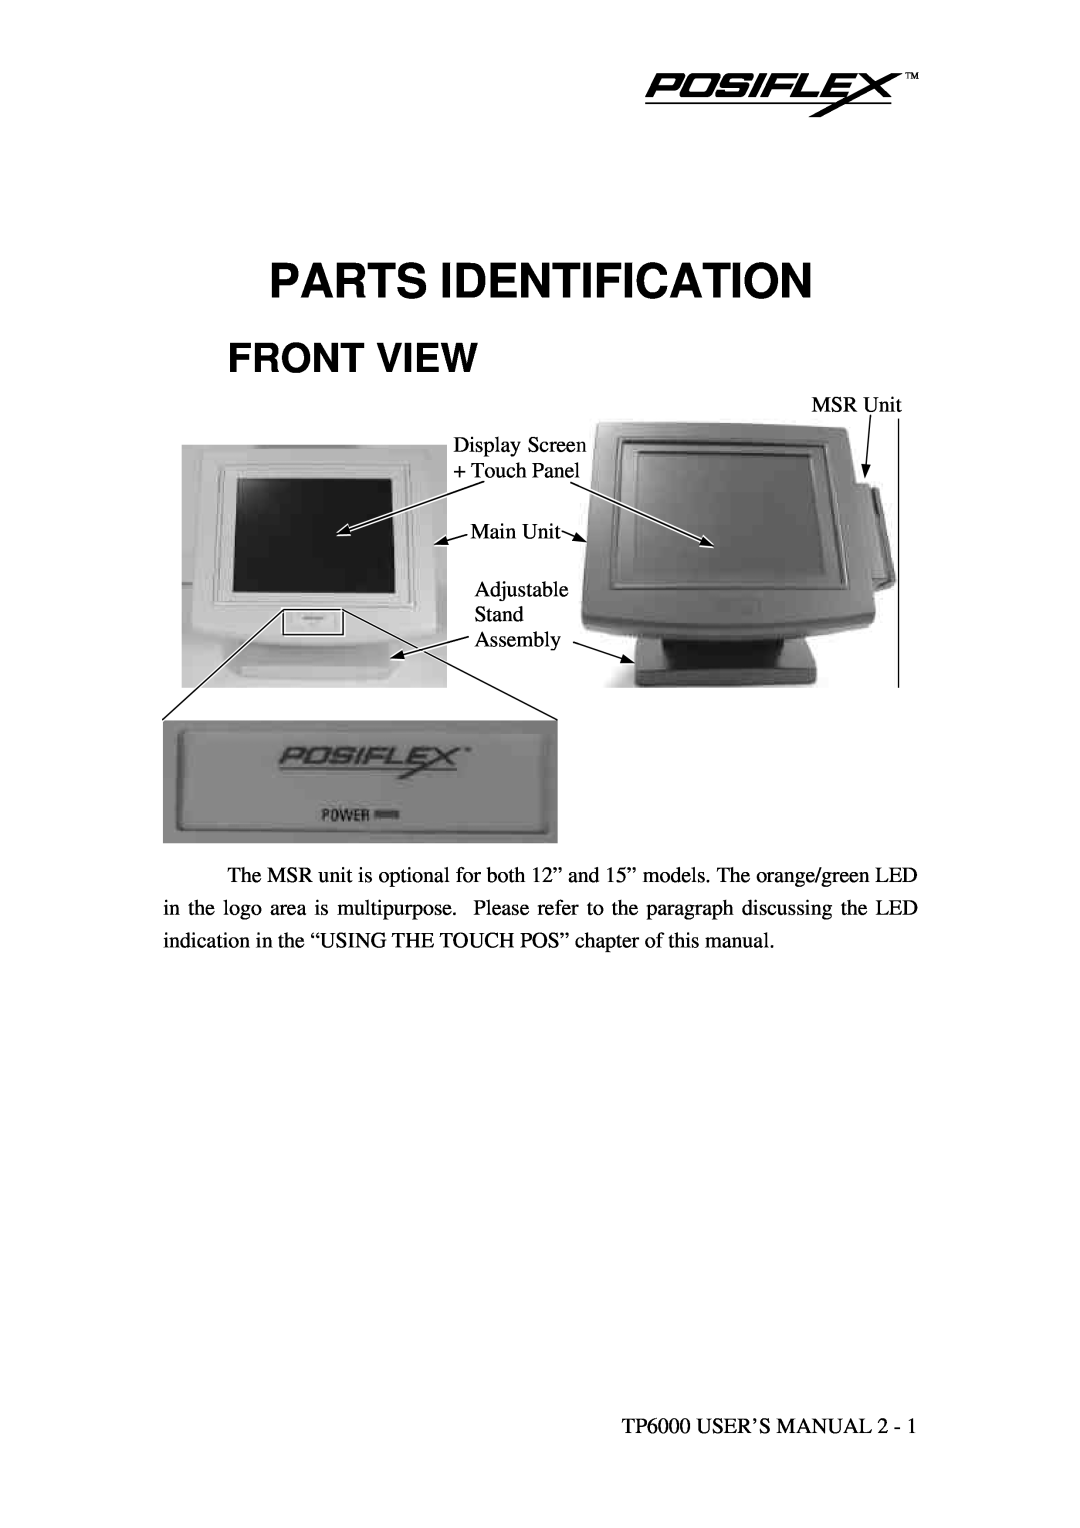 Mustek TP-6000 user manual Parts Identification, Front View 